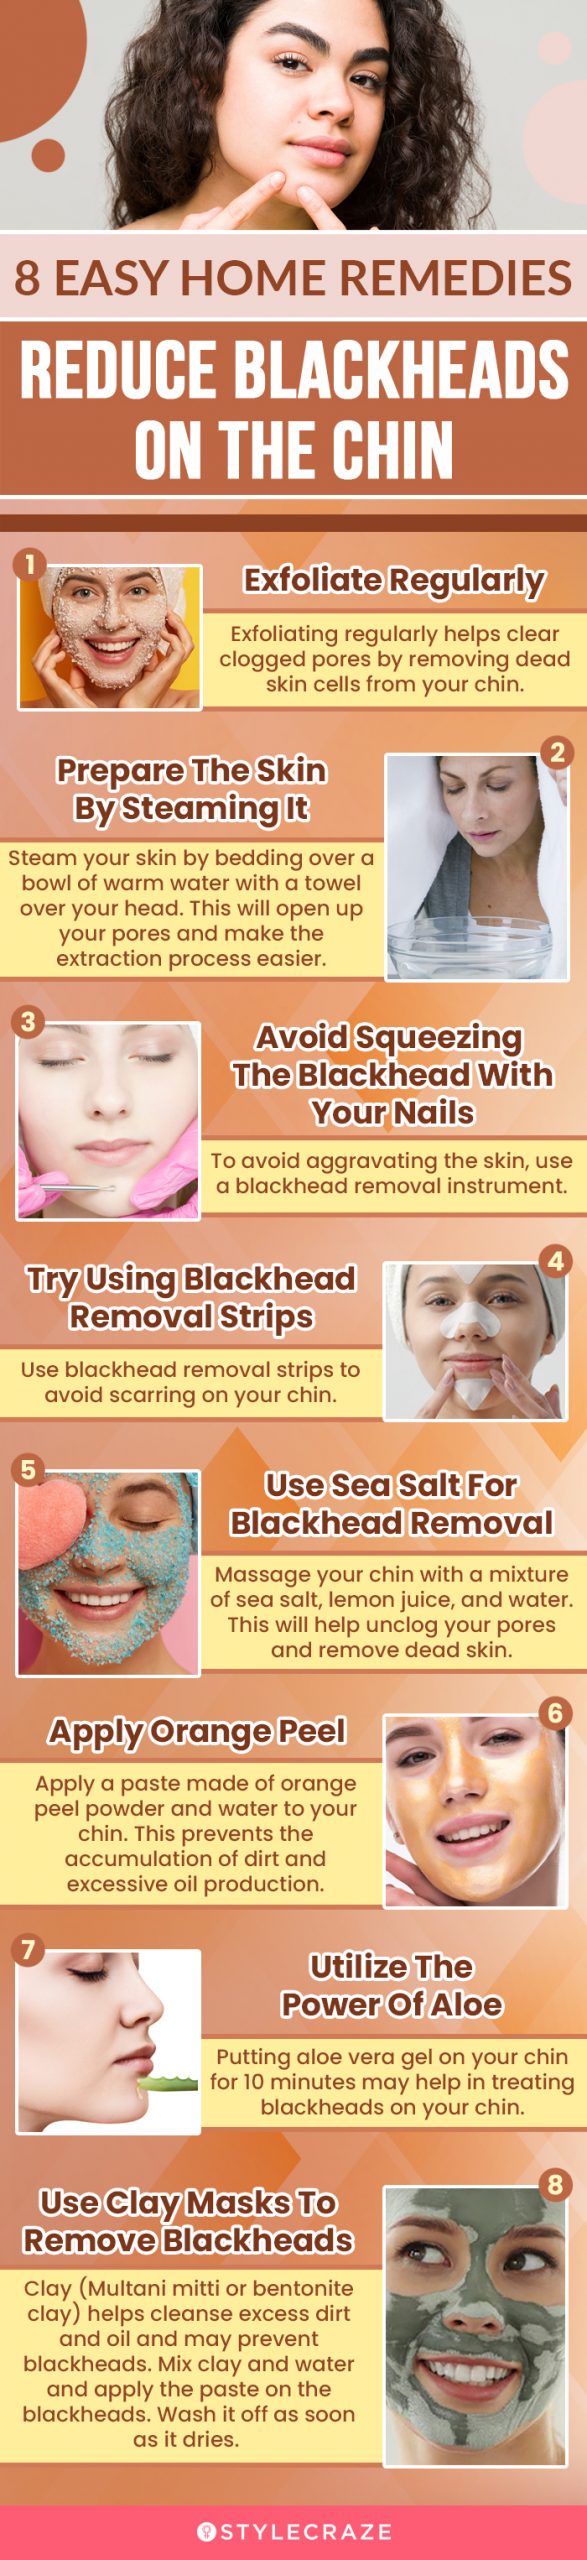 8 easy home remedies to reduce blackheads on the chin (infographic)